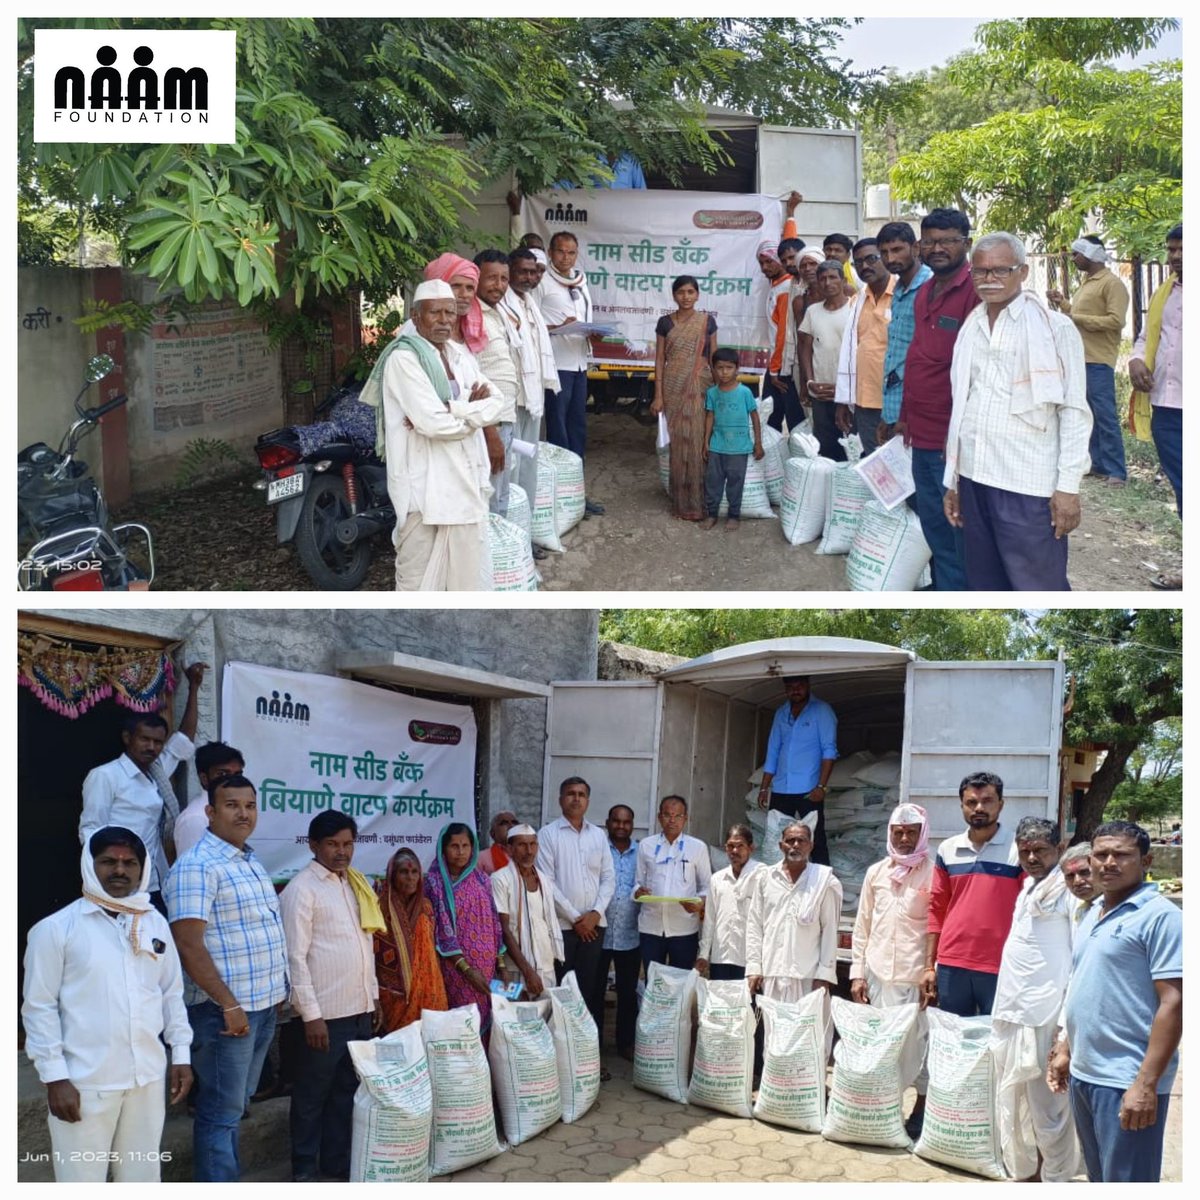 Naam Foundation Seed Bank has started disturbing seeds to the farmers selected in the Naam Livelihood Project. 414 farmers from 12 villages will benefit from this initiative.
This project is implemented by Vasundhara Foundation.

#NaamFoundation #NanaPatekar #MakarandAnaspure